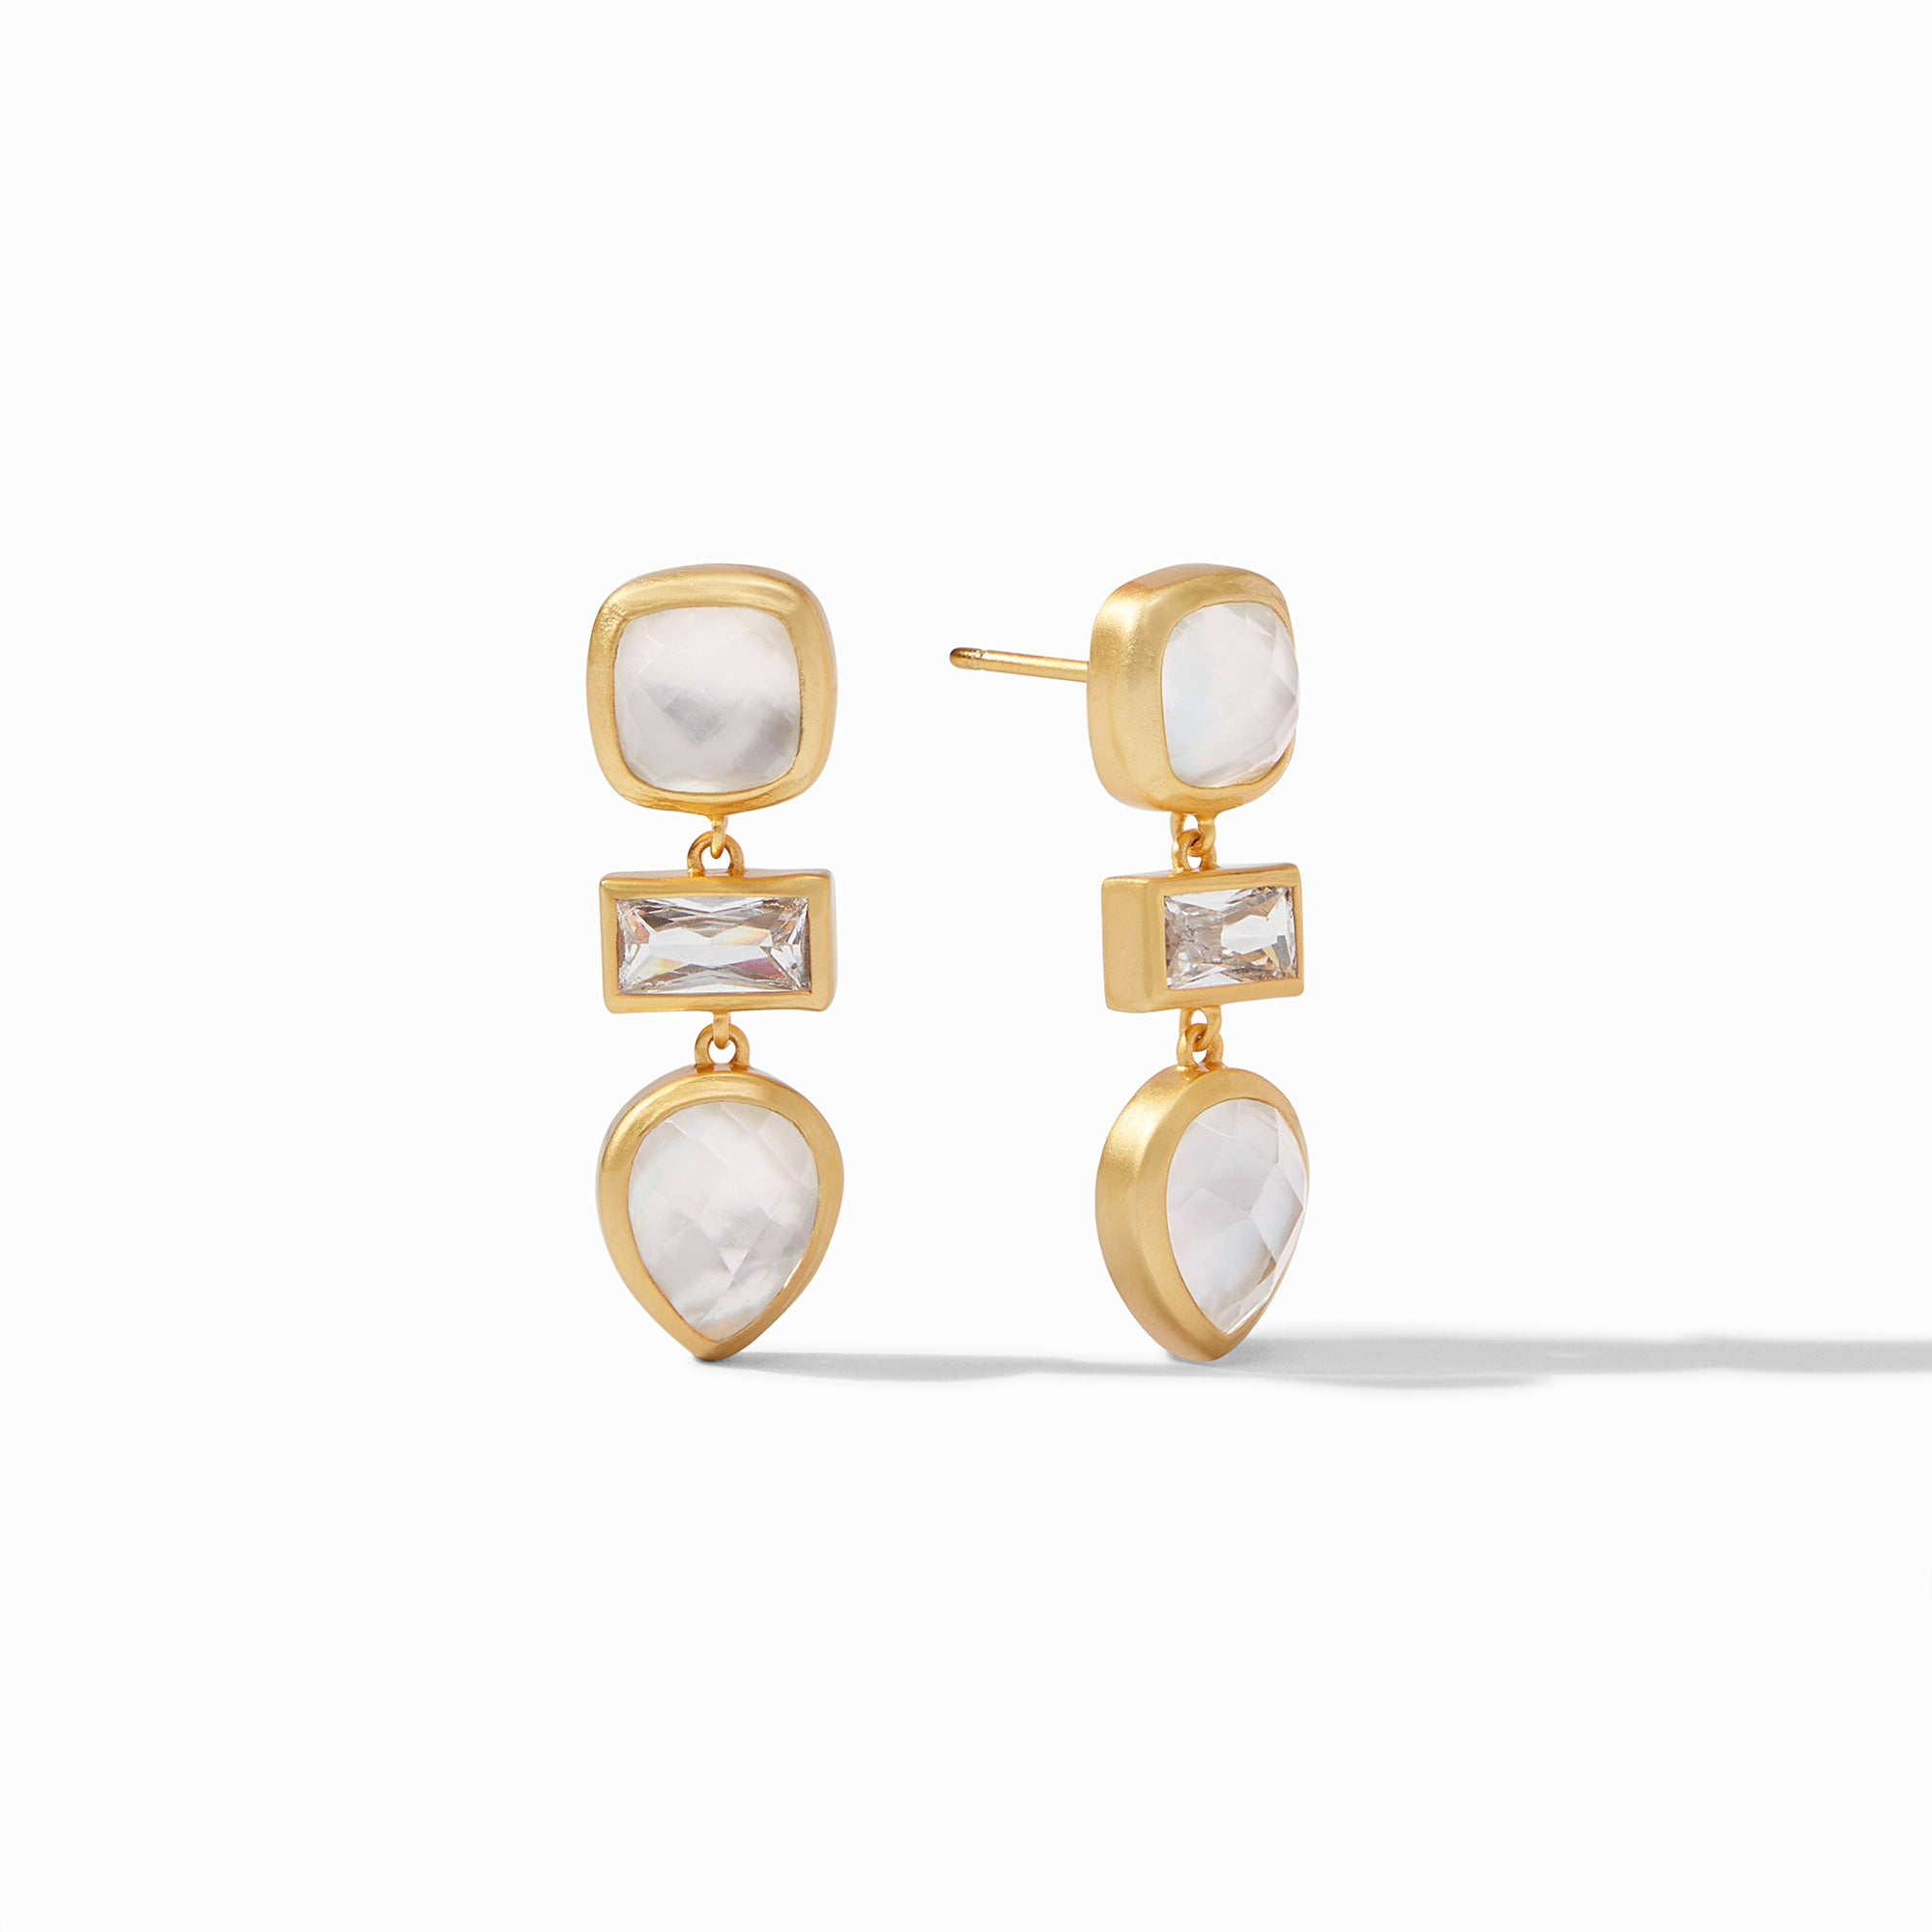 Julie Vos - Antonia Tier Earring, Iridescent Clear Crystal